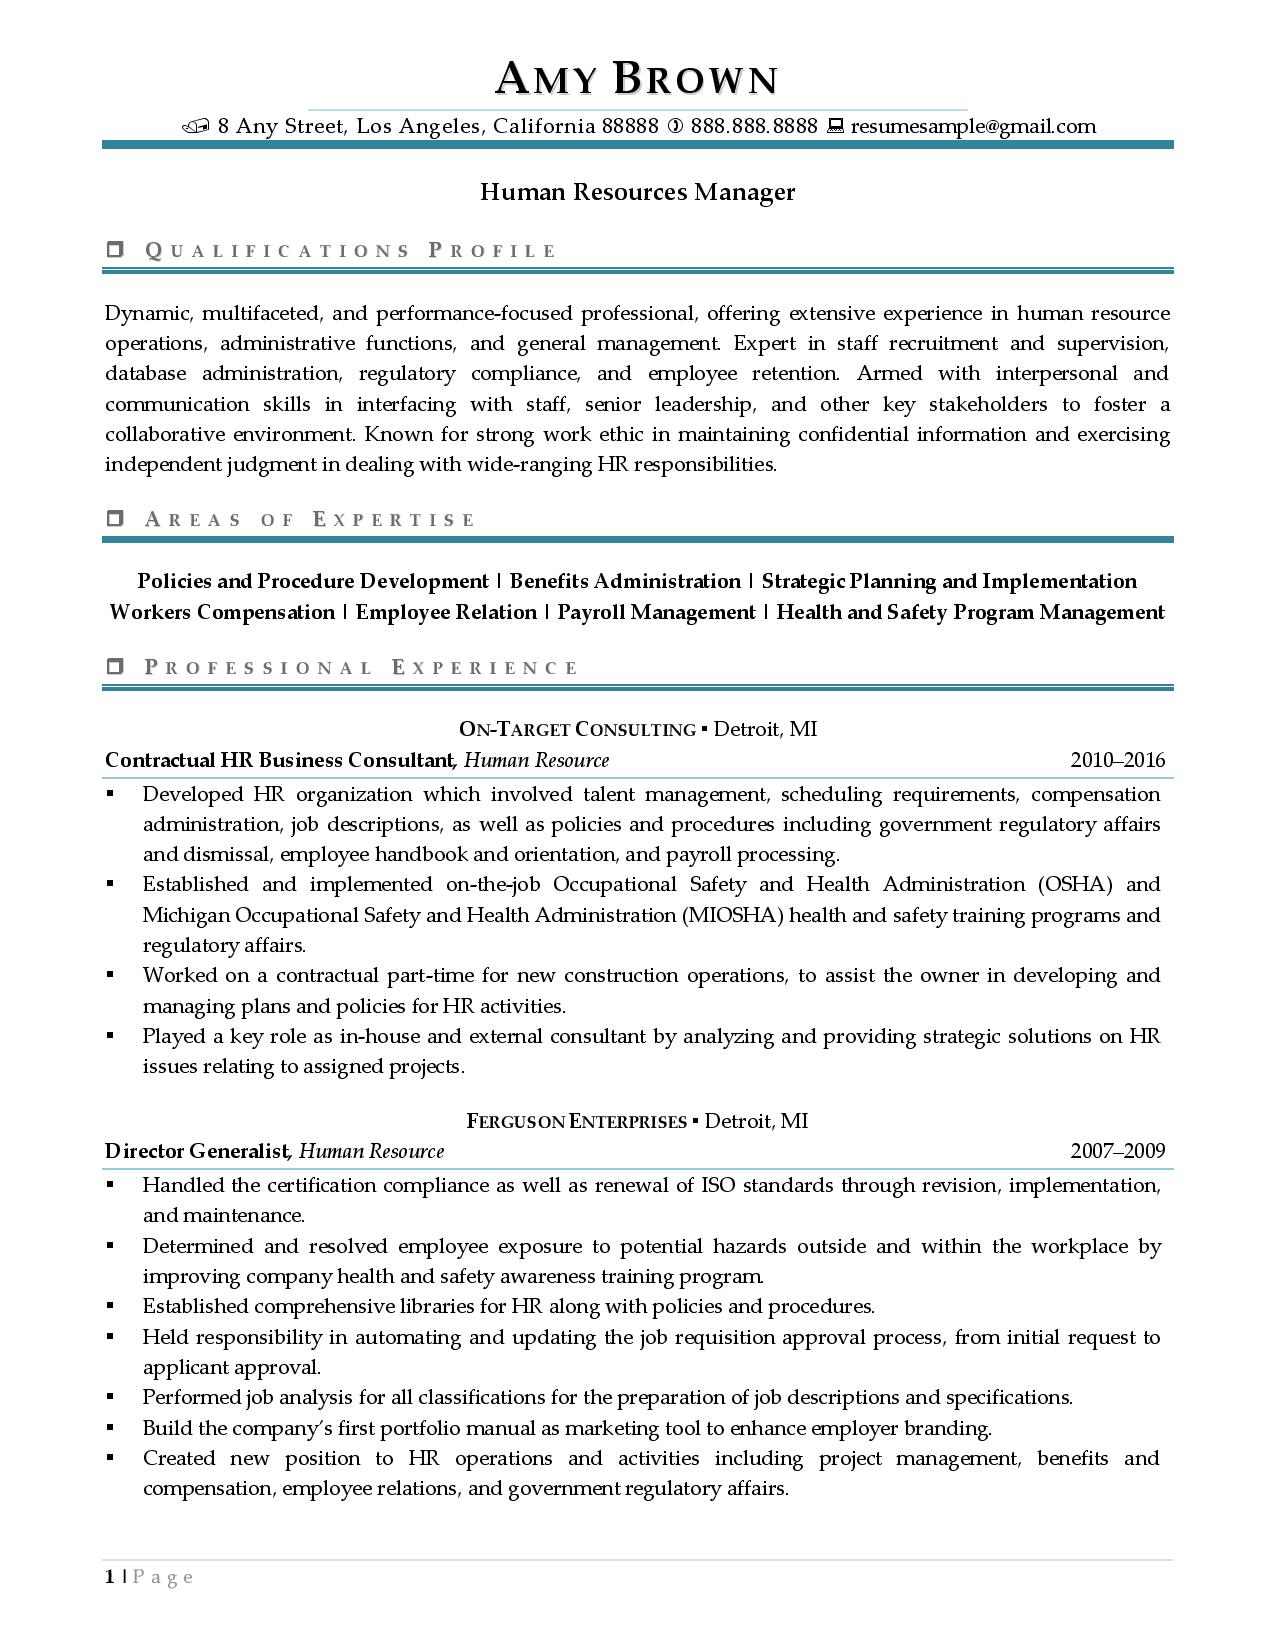 resume of human resources manager